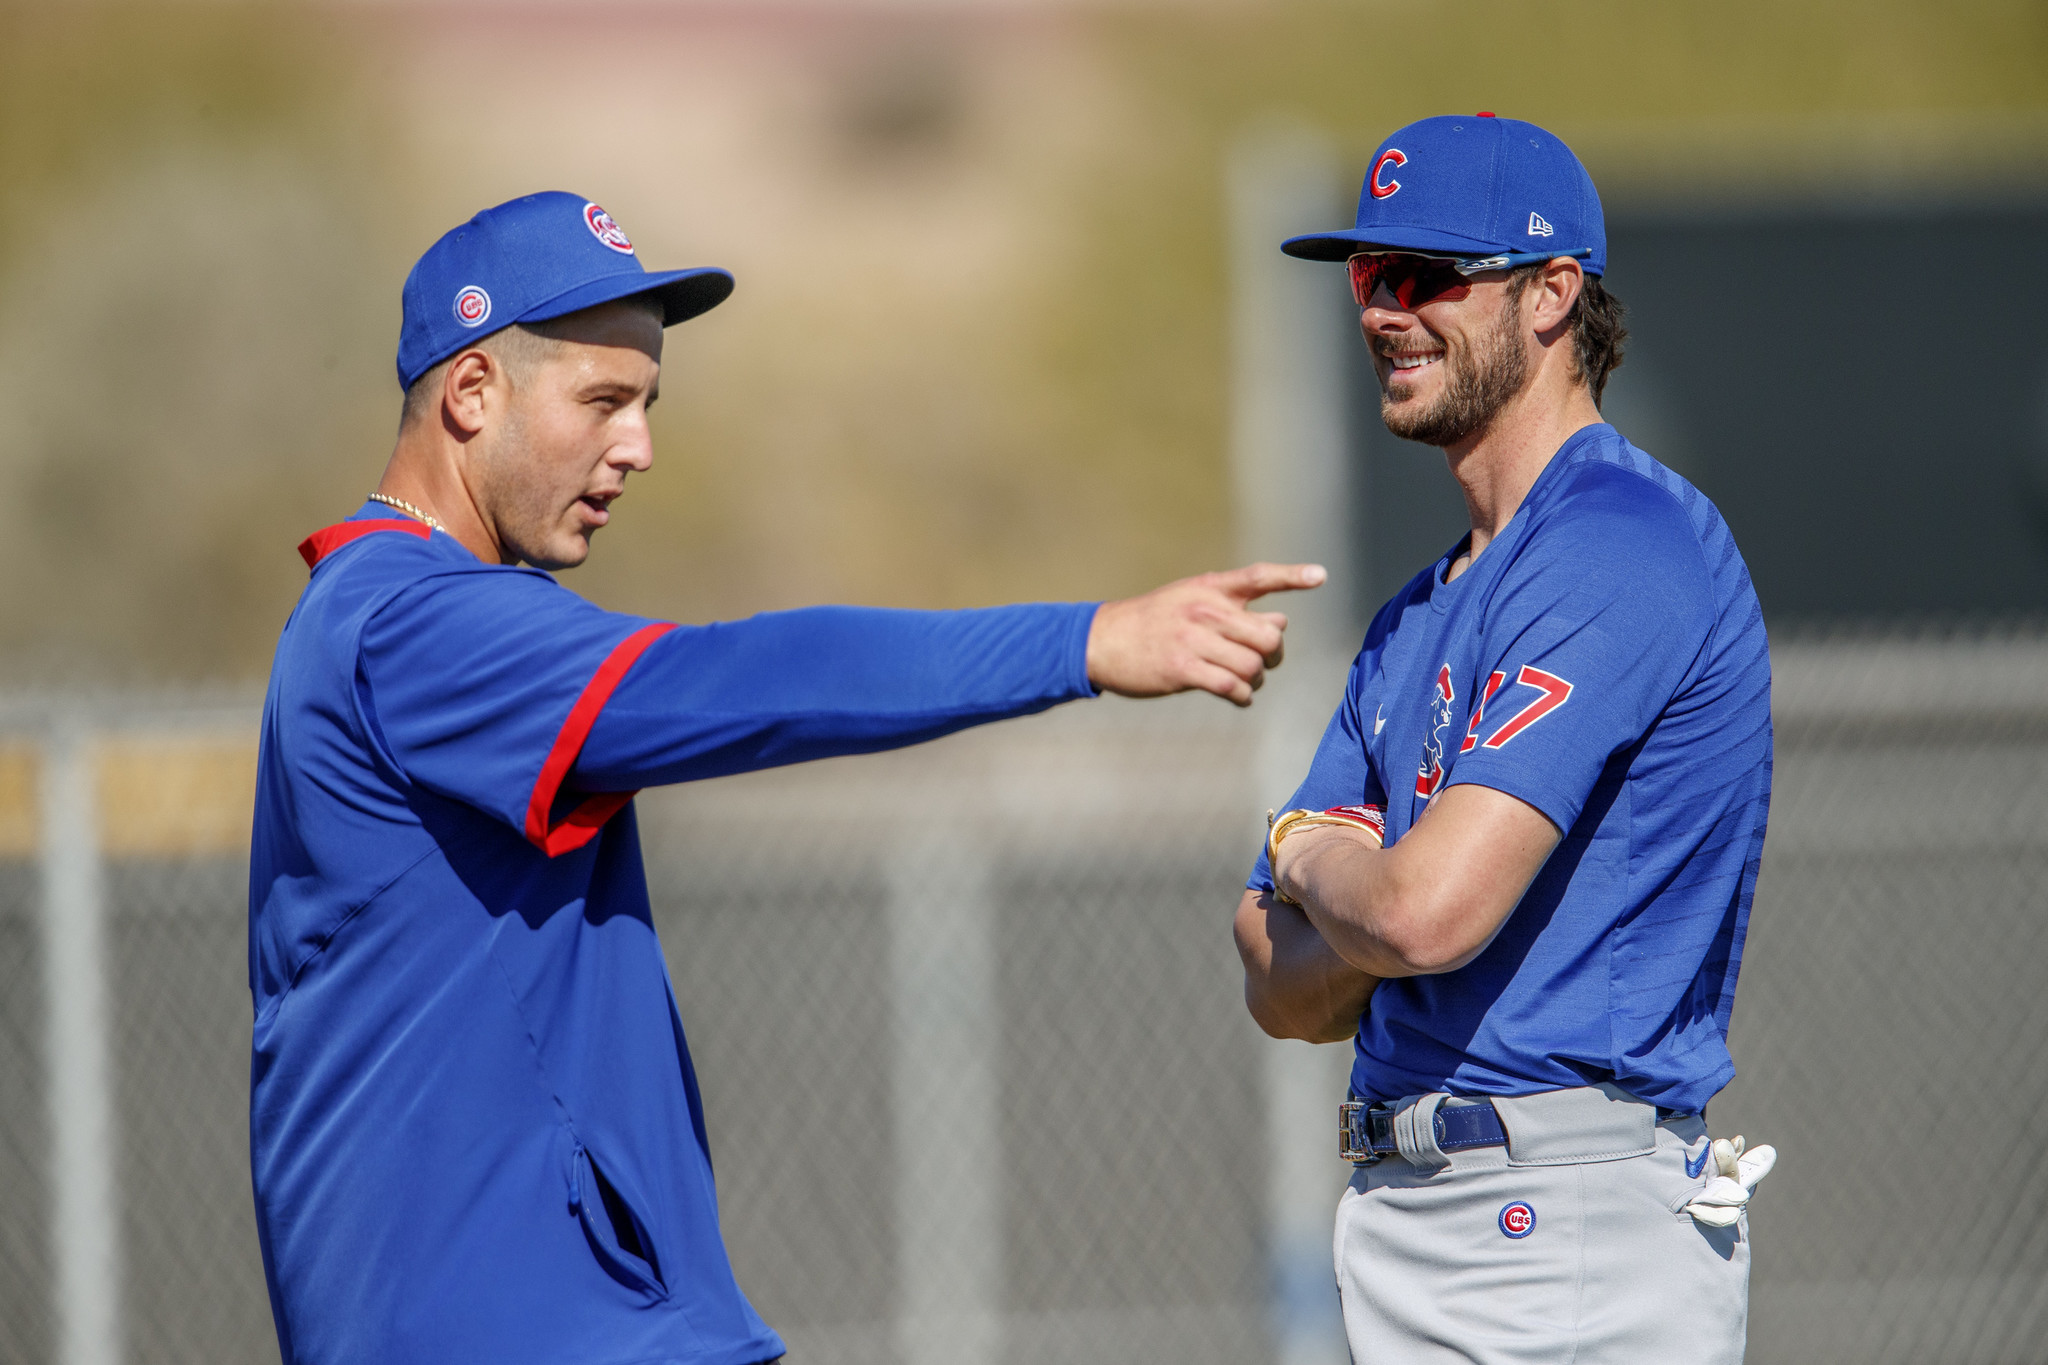 Reports: Cubs ship Kris Bryant to Giants in deadline deal